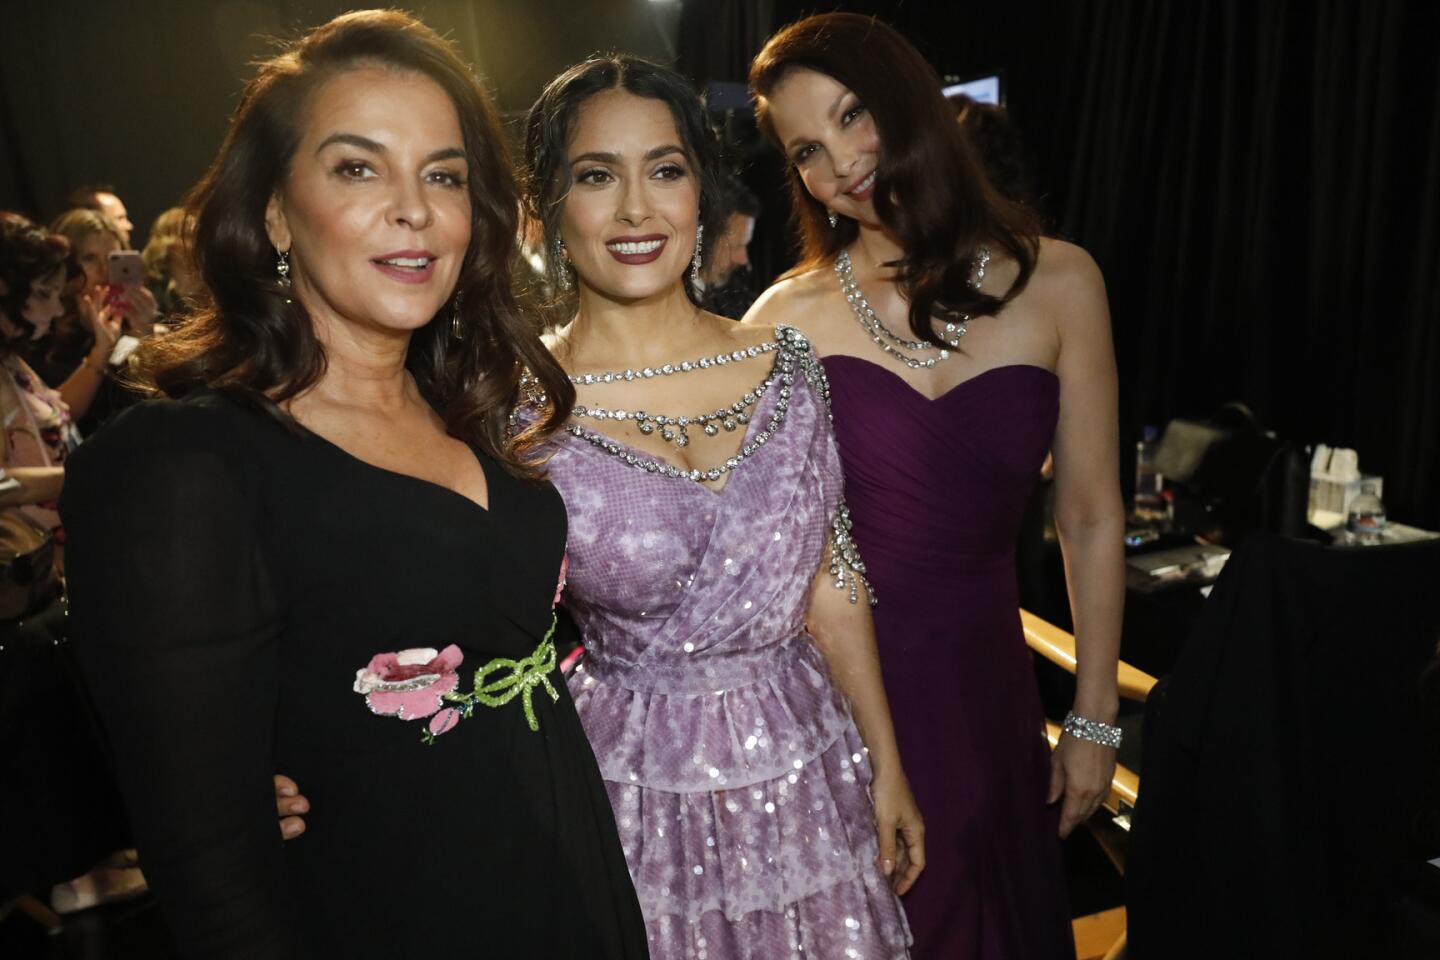 Annabella Sciorra, left, Salma Hayek and Ashley Judd backstage at the 90th Academy Awards on Sunday at the Dolby Theatre in Hollywood.